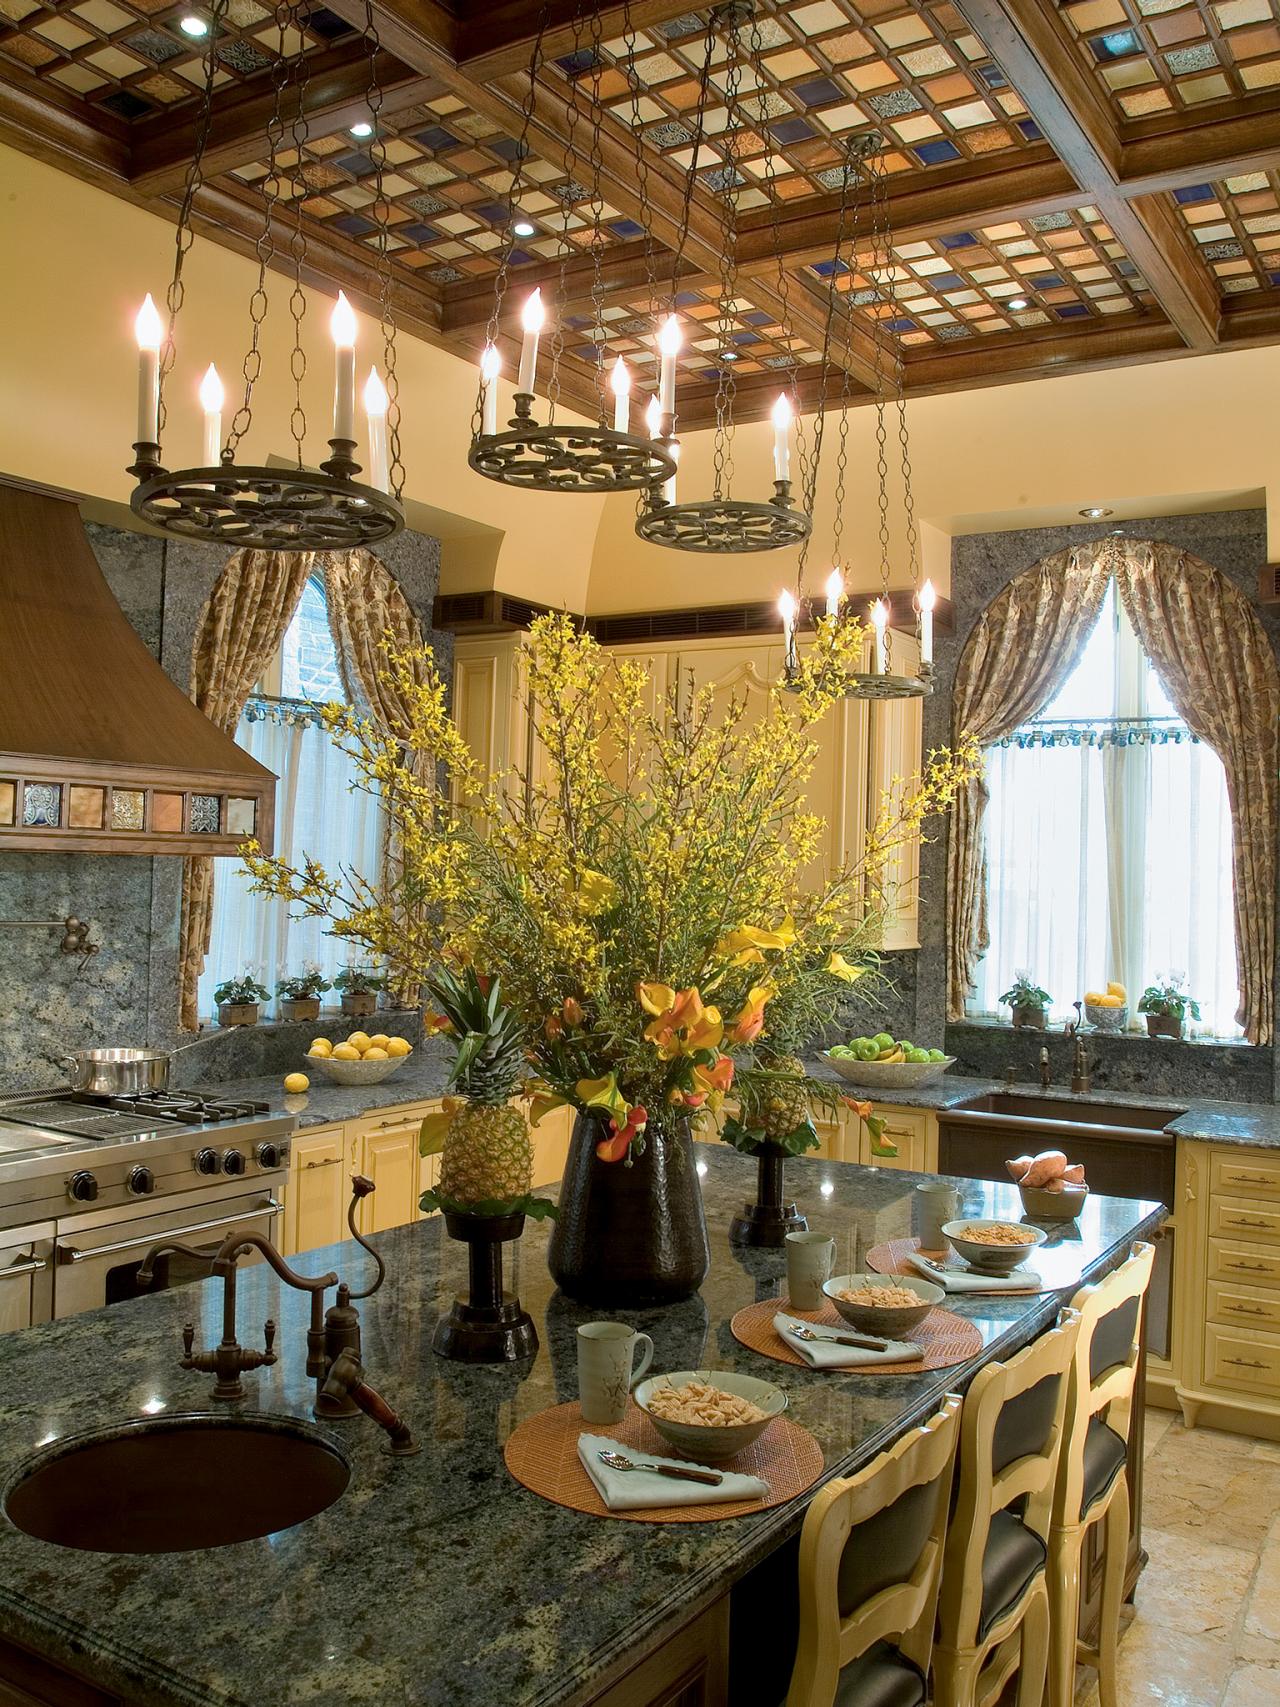 CI-Farrow-And-Ball-The-Art-of-Color-pg46_Eisenreich_kitchen-dining-tile-ceiling_3x4.jpg.rend.hgtvcom.1280.1707.jpeg